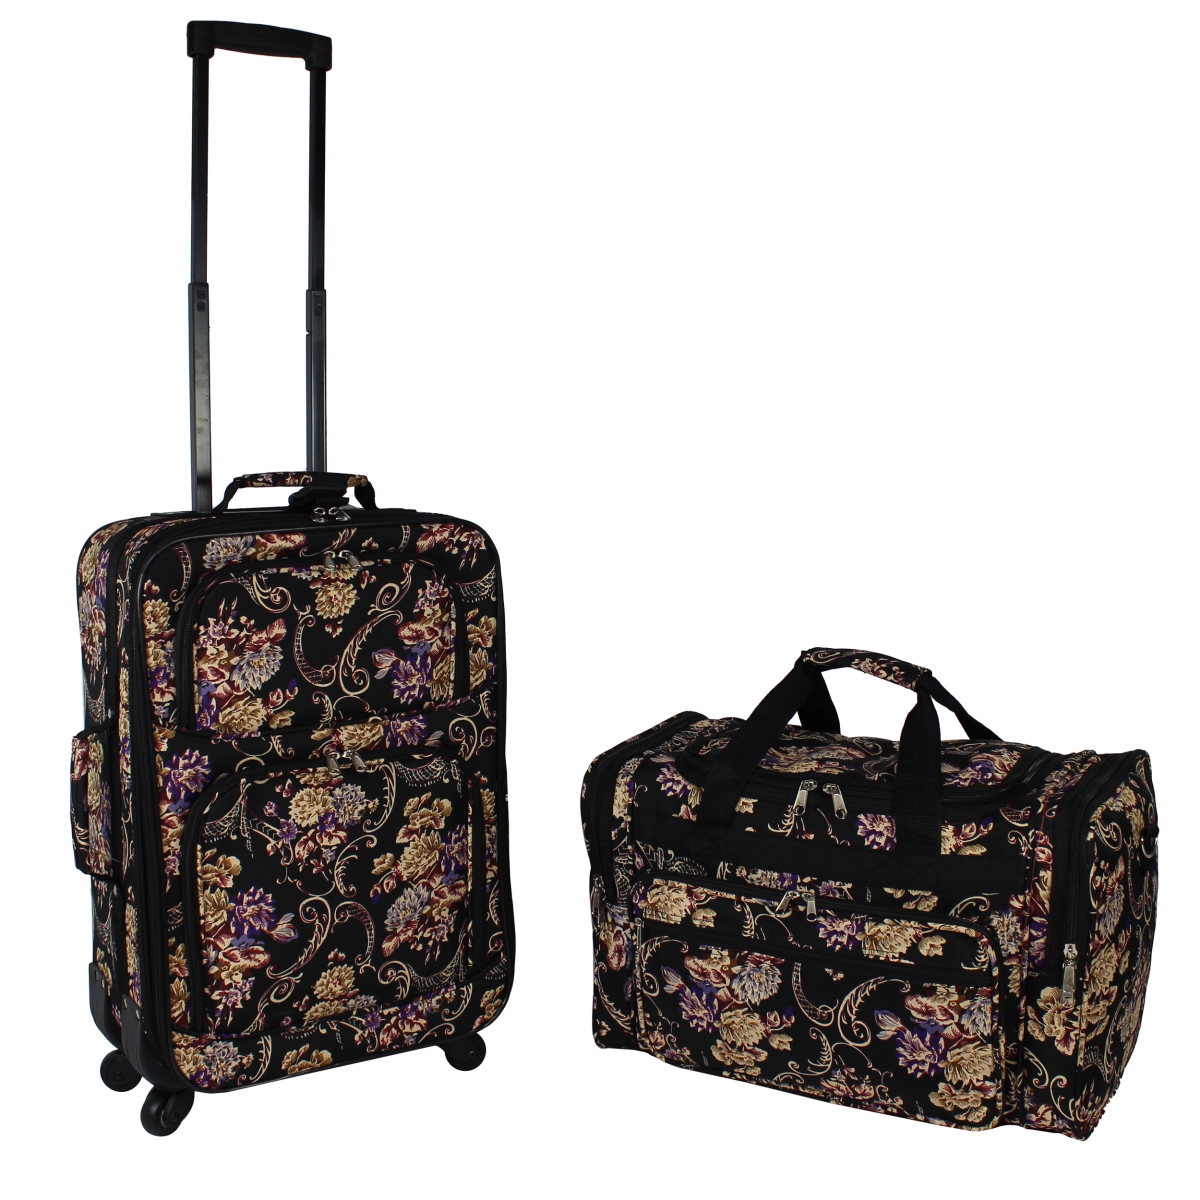 Wt8701-2-209 Carry On Expandable Spinner Luggage Set - Classic Floral, 2 Piece